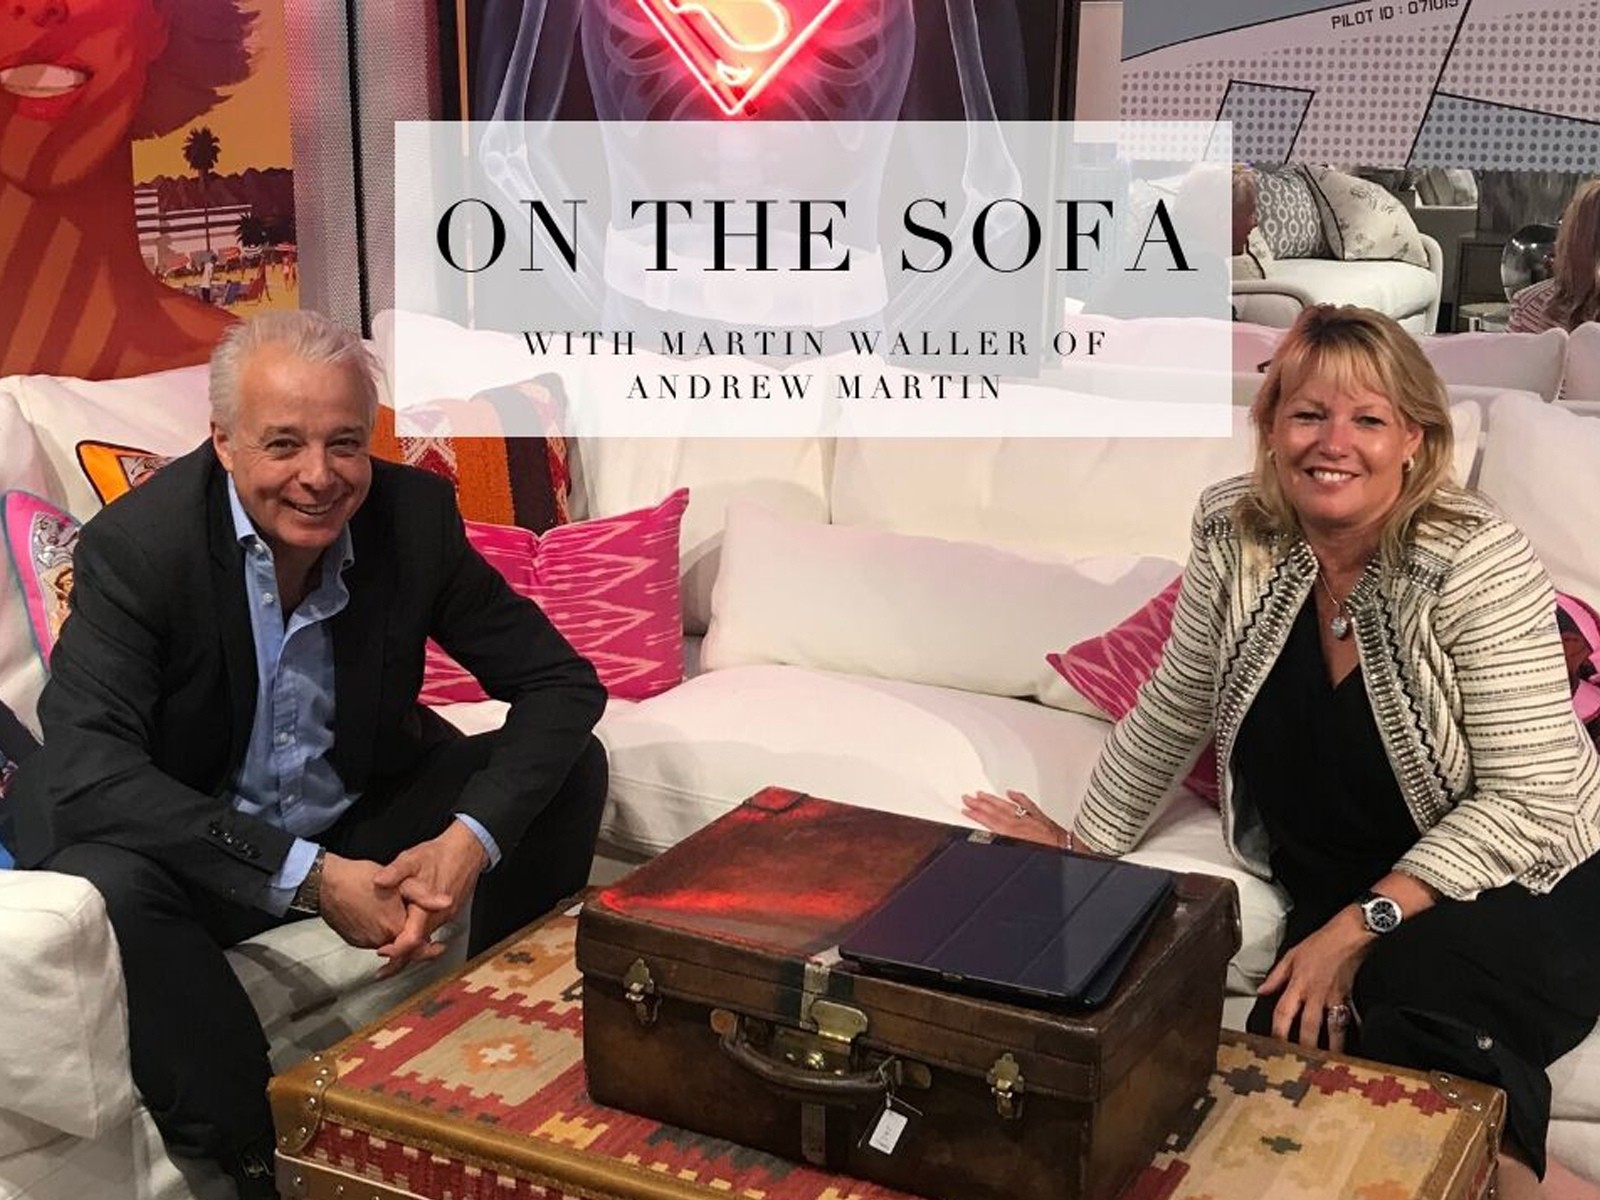 On the sofa with Martin Waller